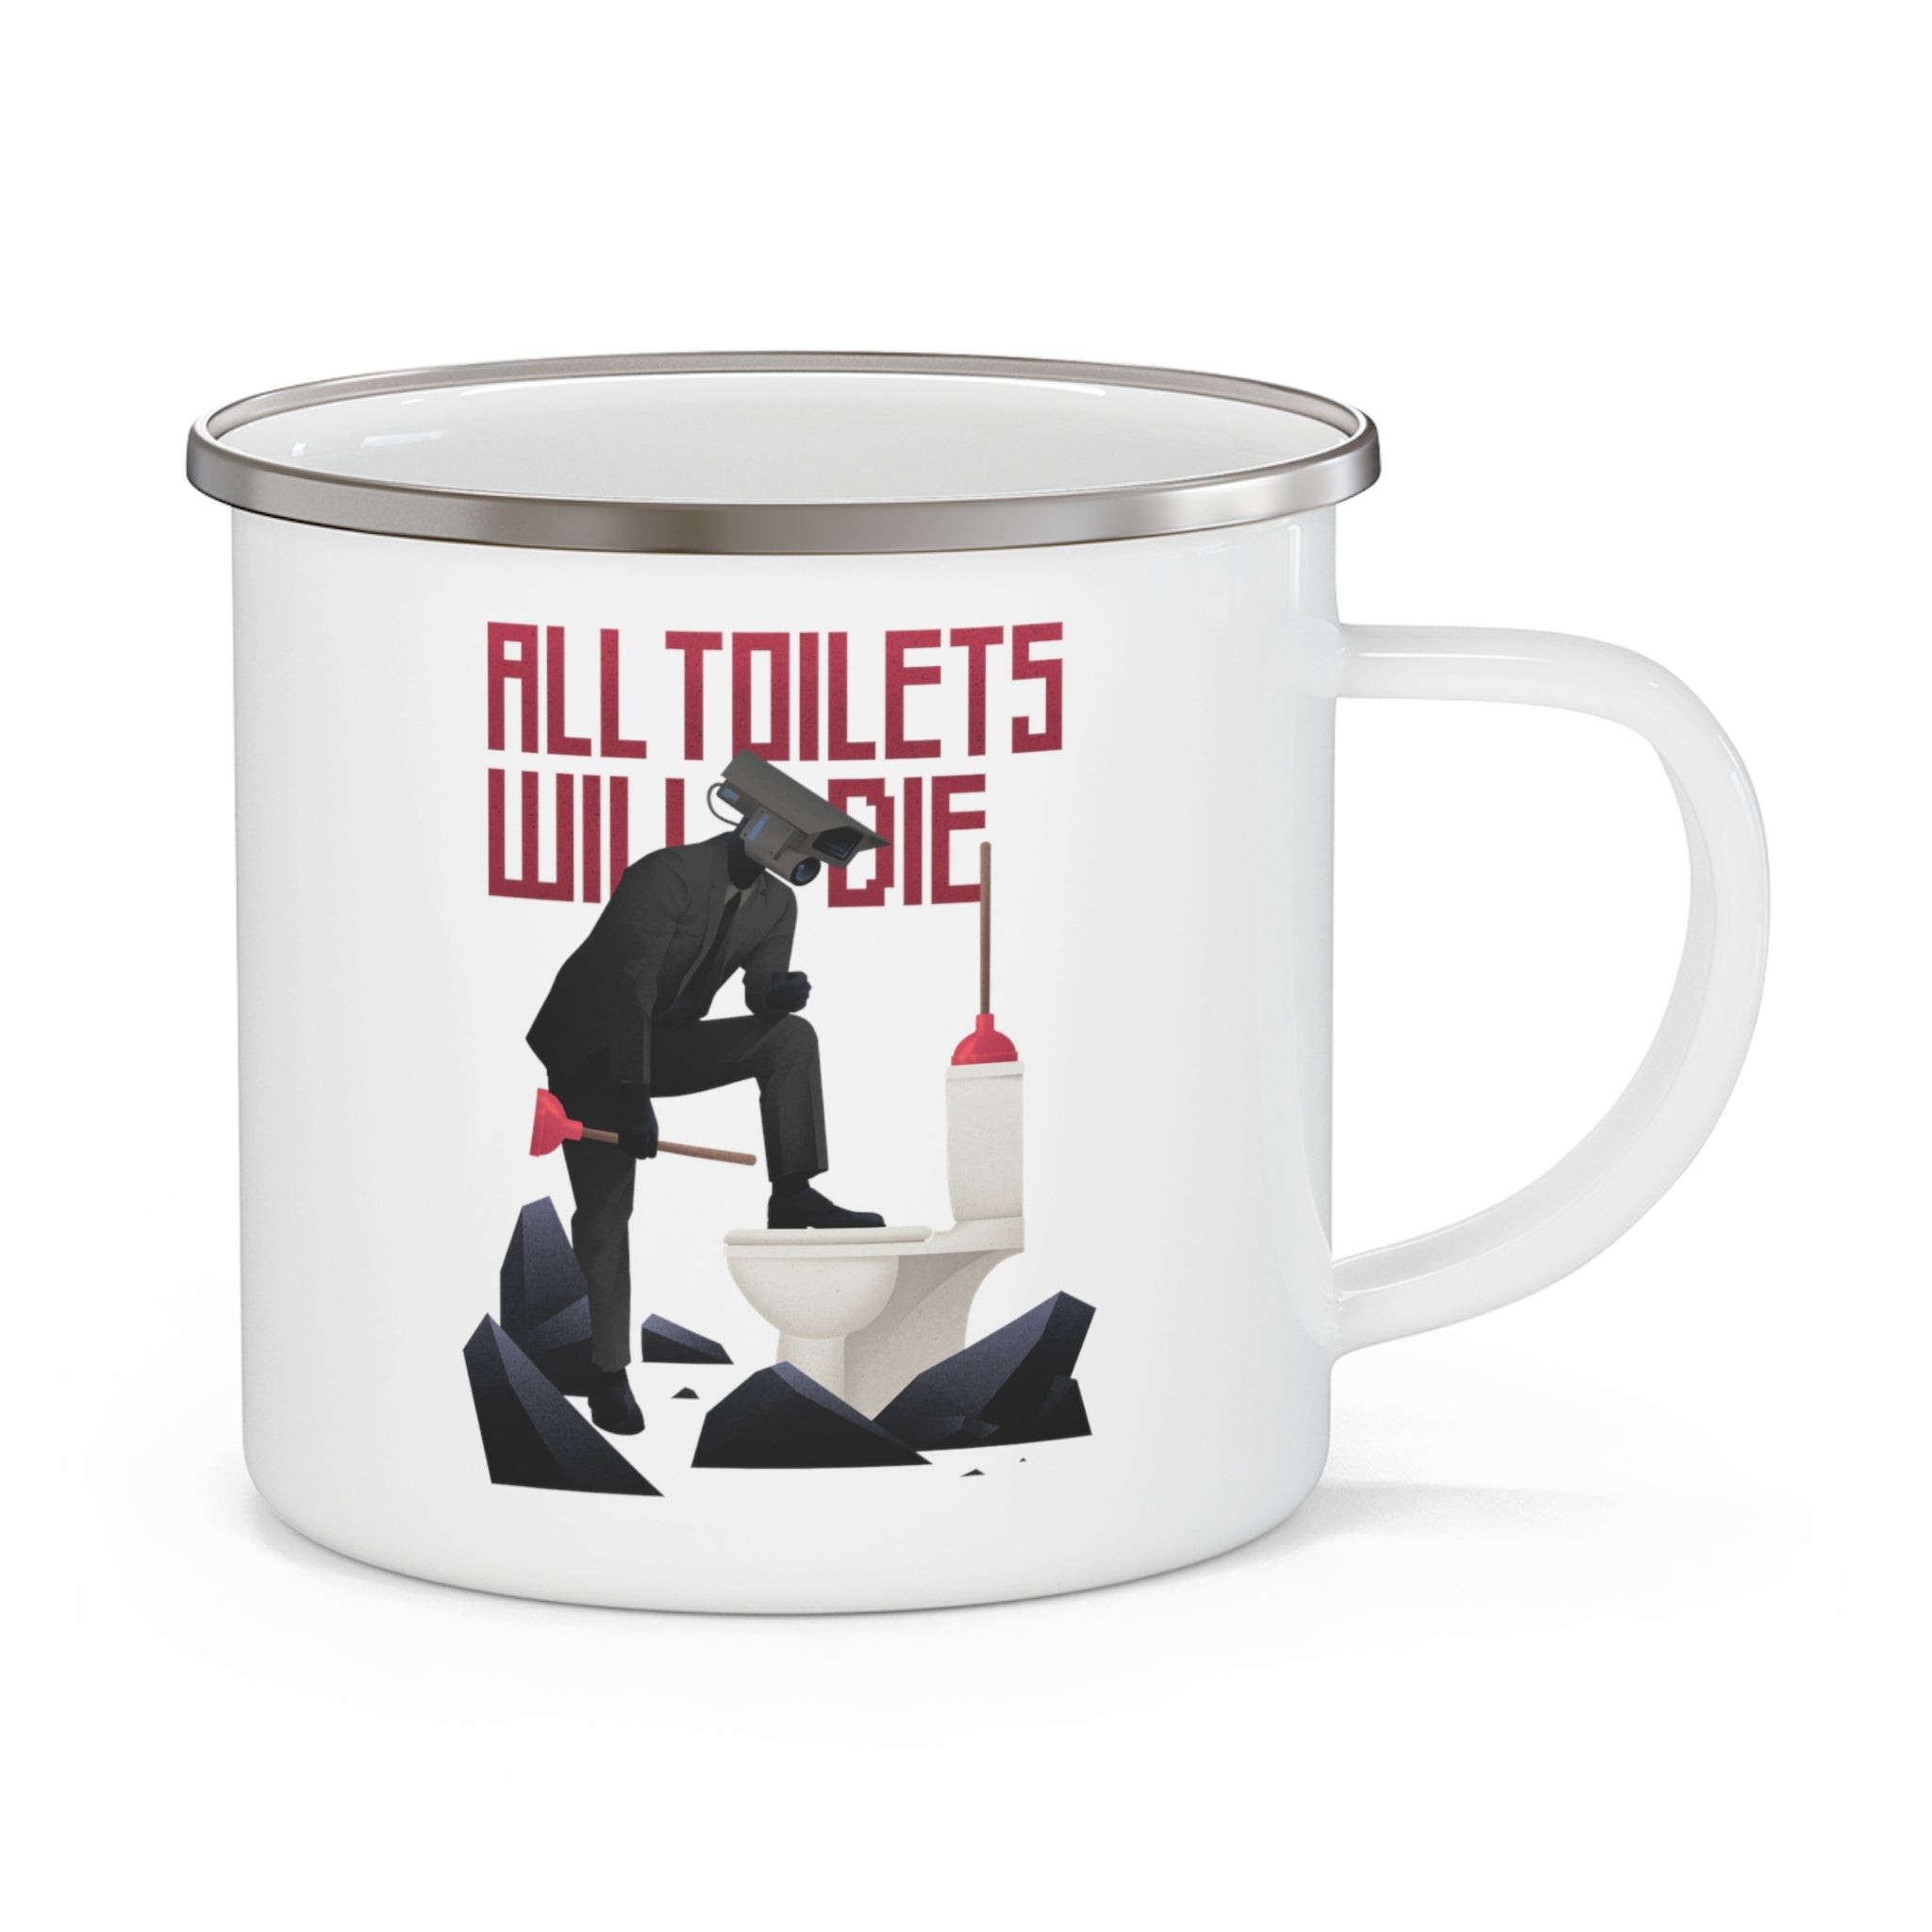 White Camping Mug featuring an image of plungerman stepping on a toilet with the phrase "All Toilets Will Die" behind him